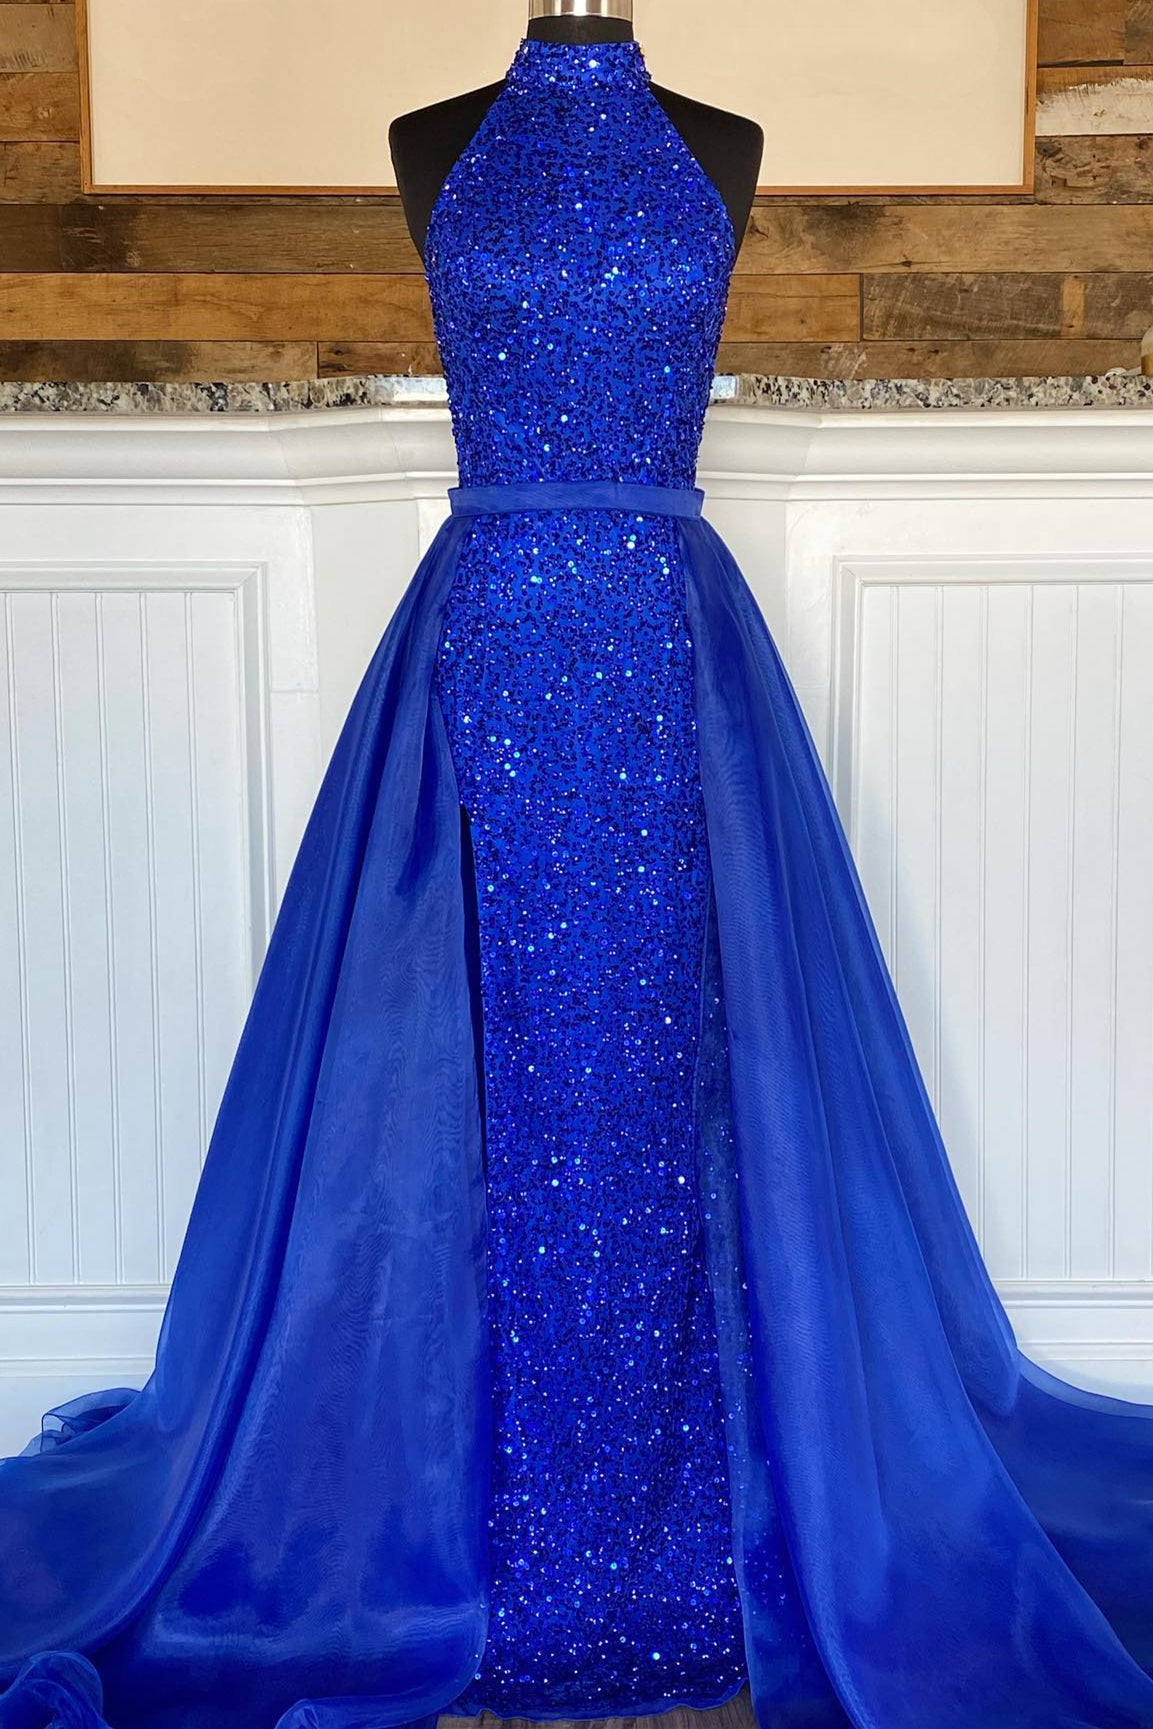 High Neck Royal Blue Sequin Mermaid Long Formal Dress with Detachable Train